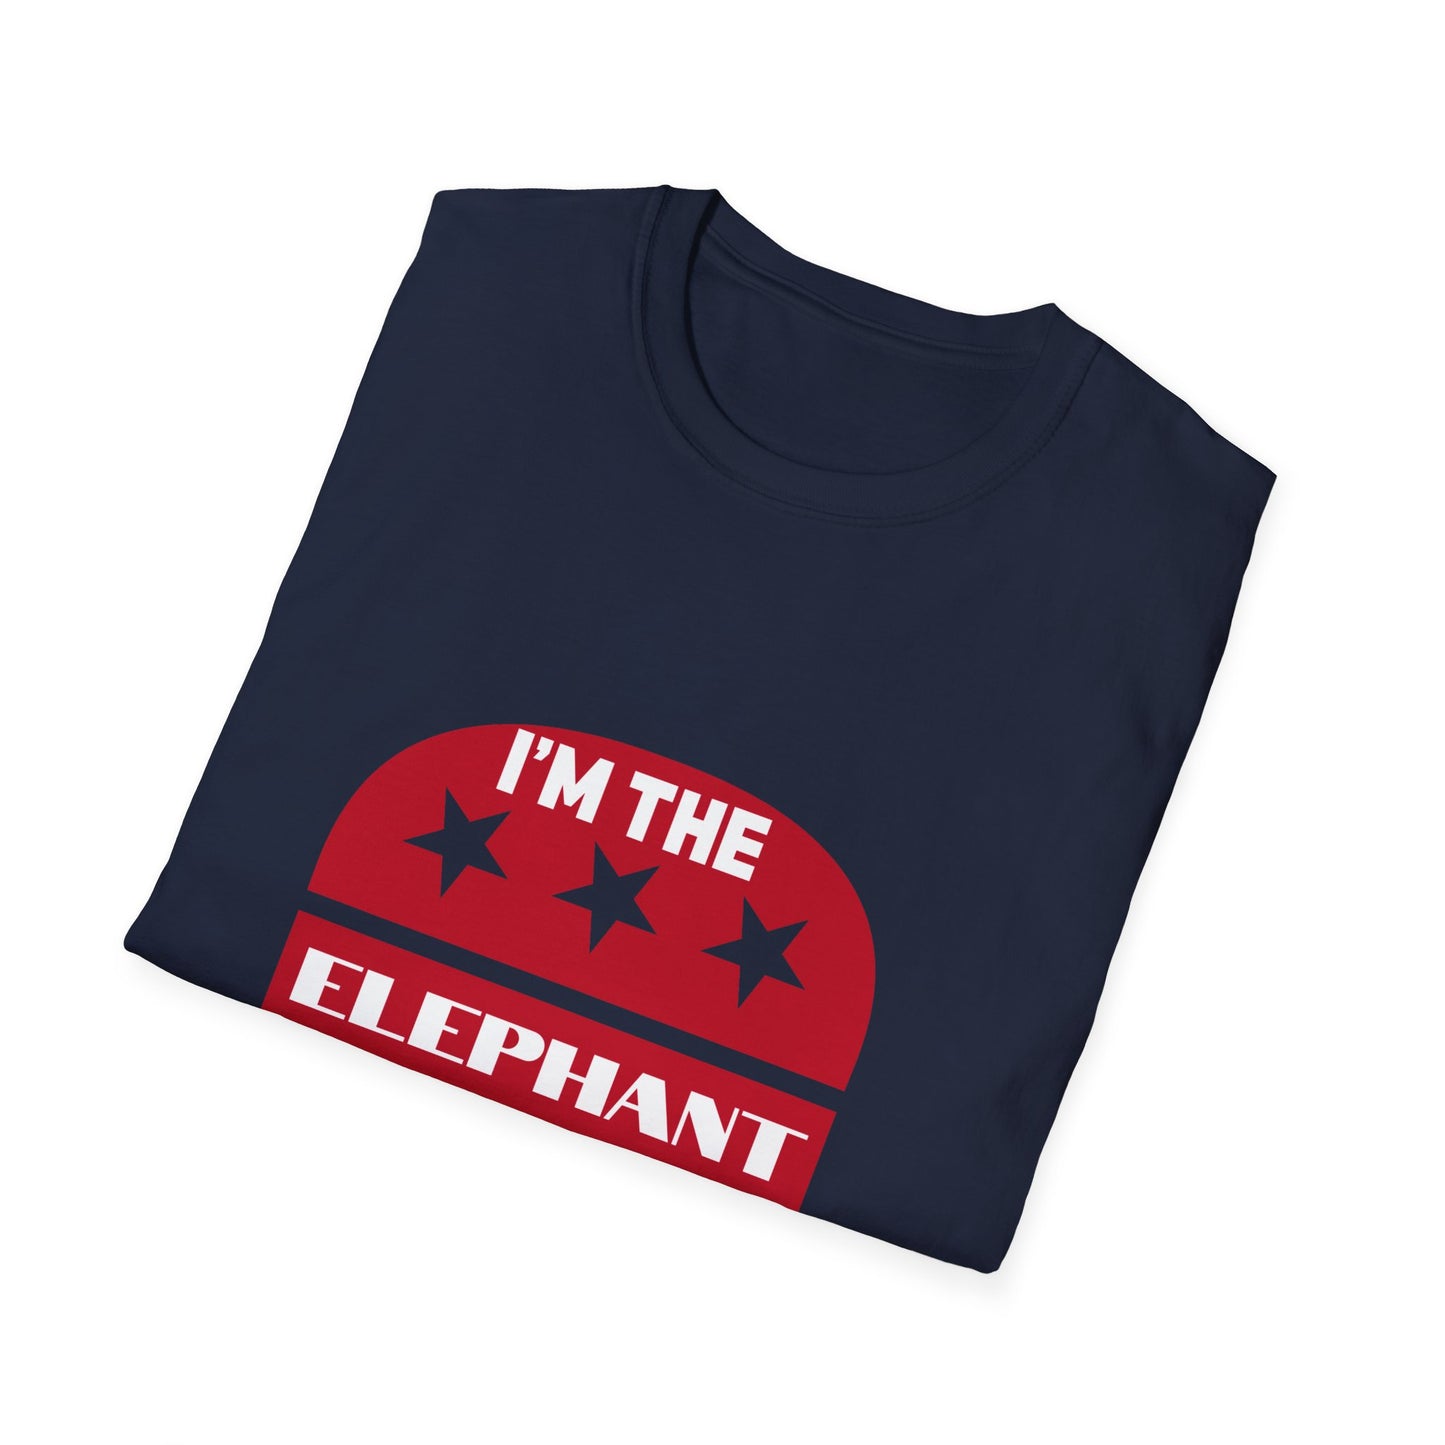 Elephant in the Room Women's Relaxed/Plus Navy Tshirt (XS-5XL)